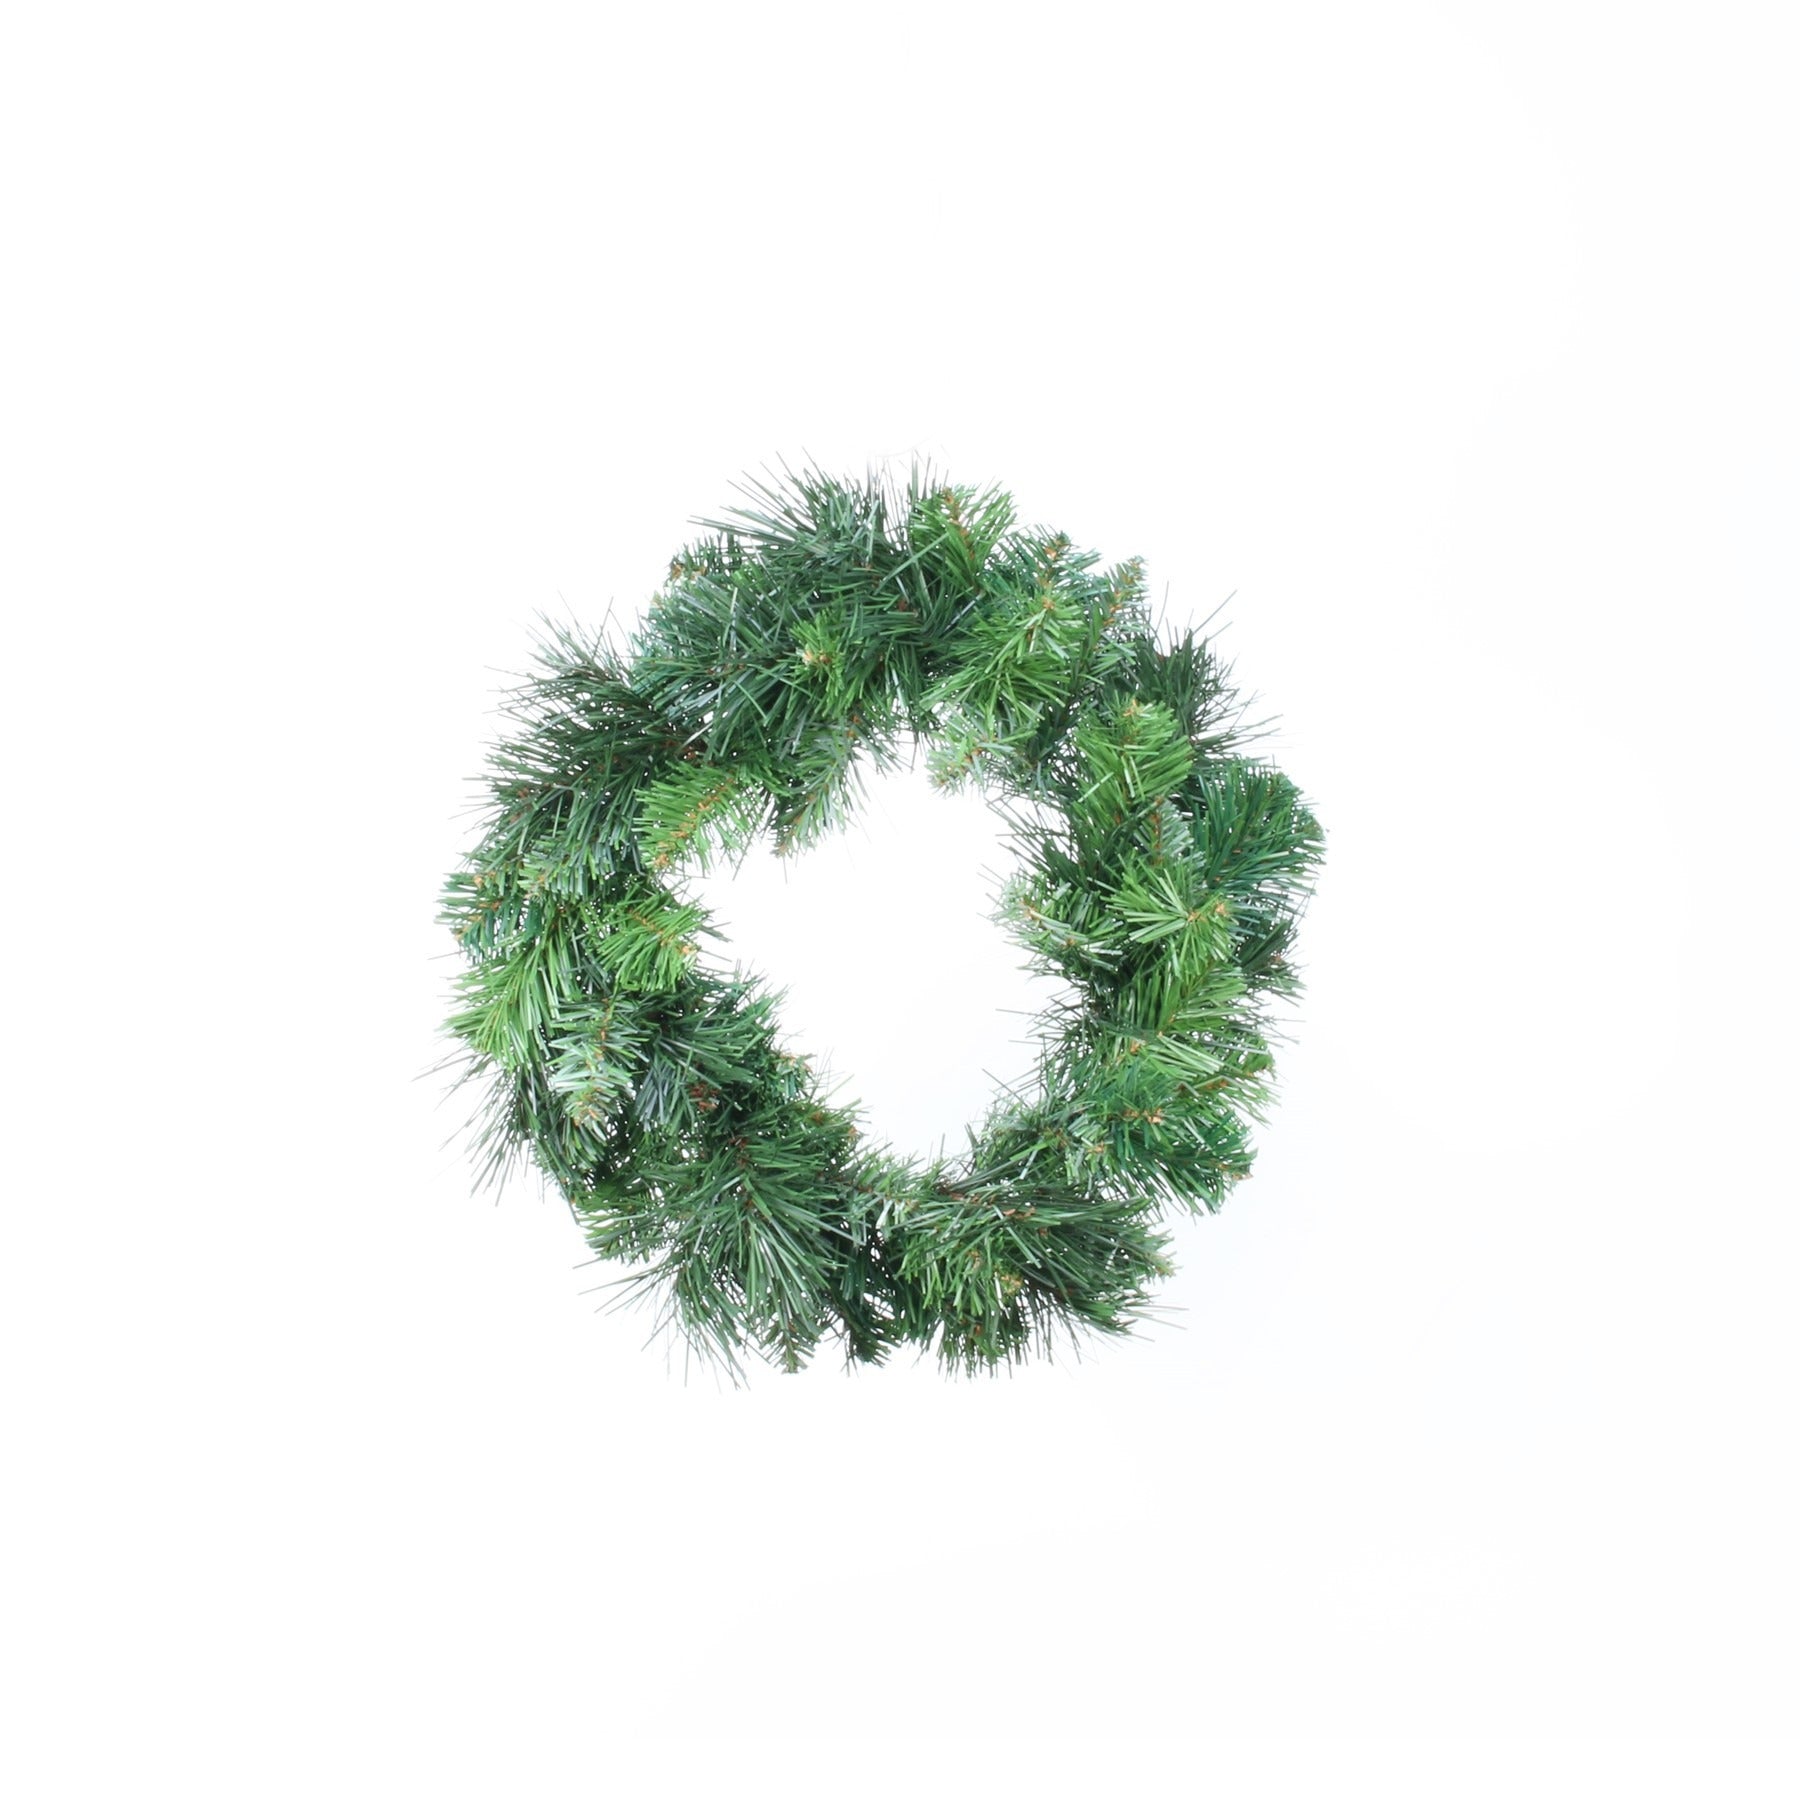 View Deluxe Evergreen Greenery Wreath 12inch information